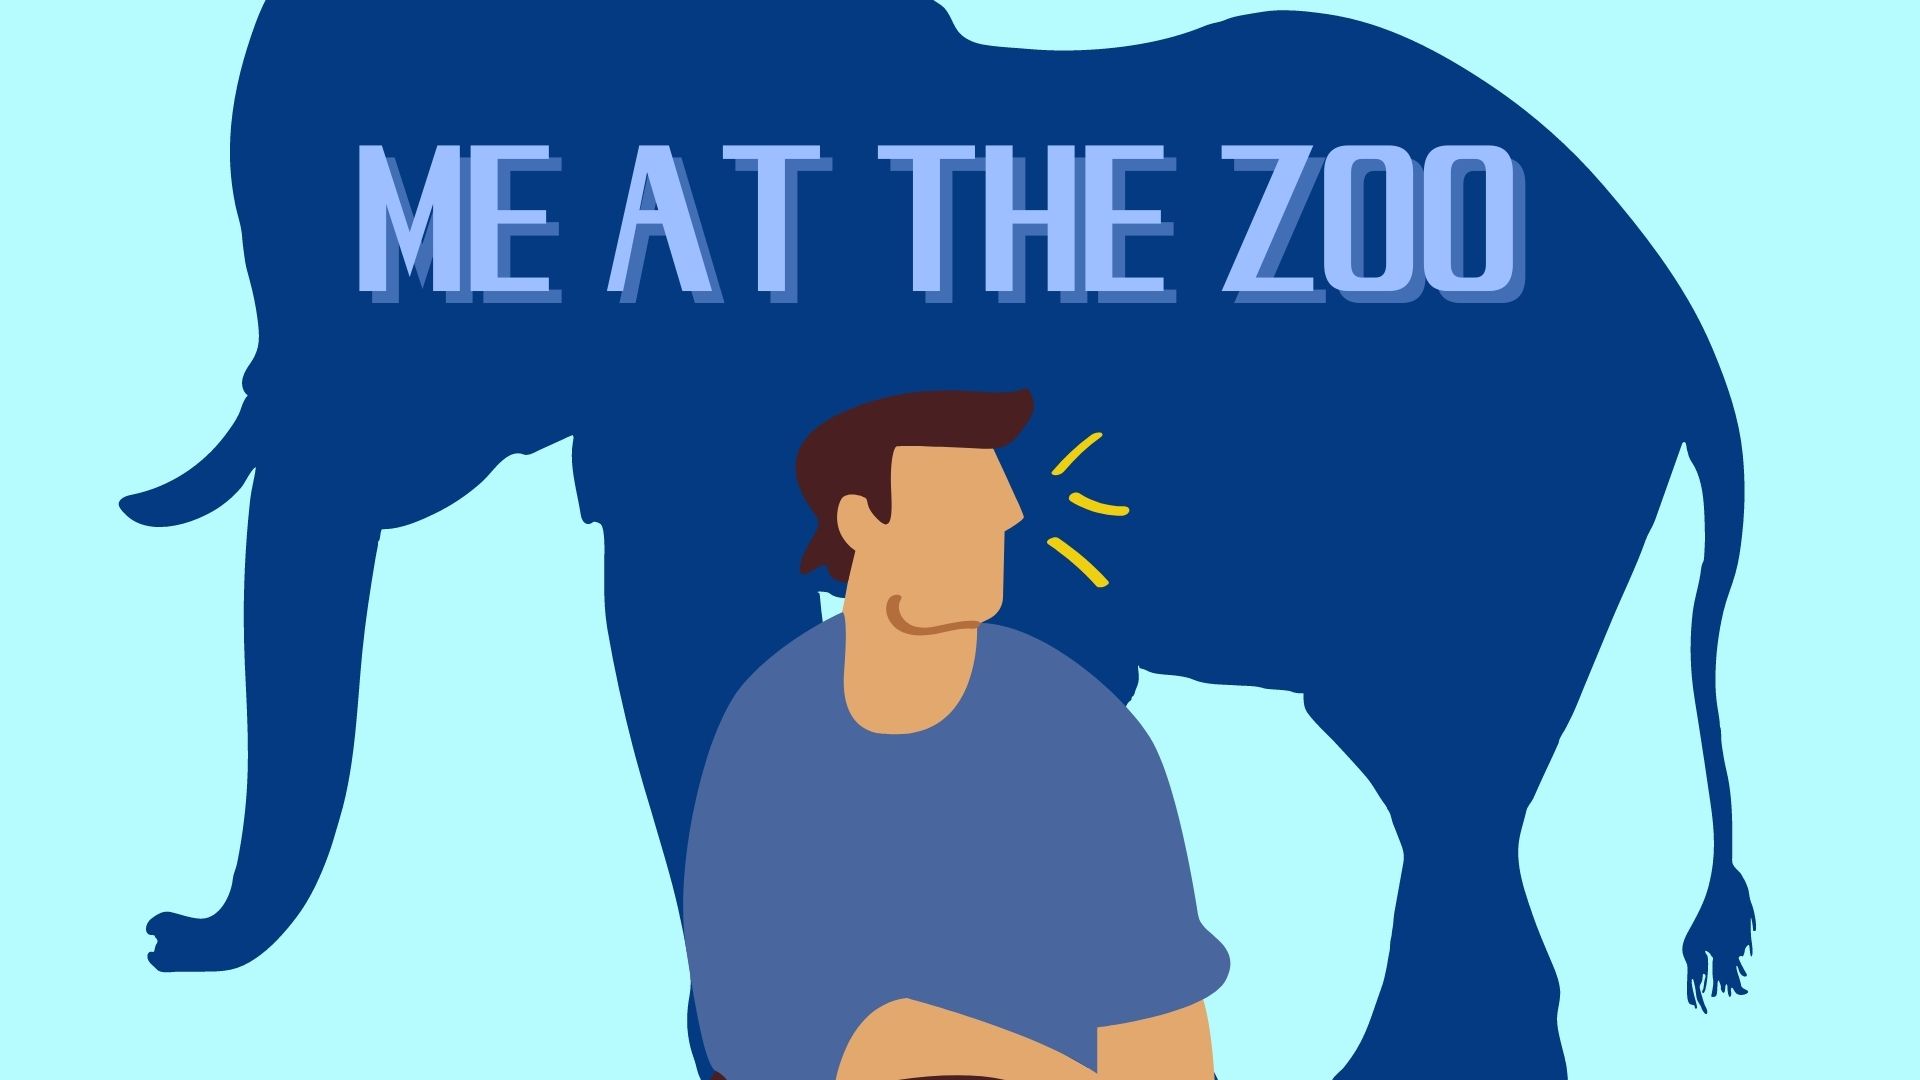 Youtubeで一番最初に投稿された動画。me at the zoo。英語解説。英語和訳。